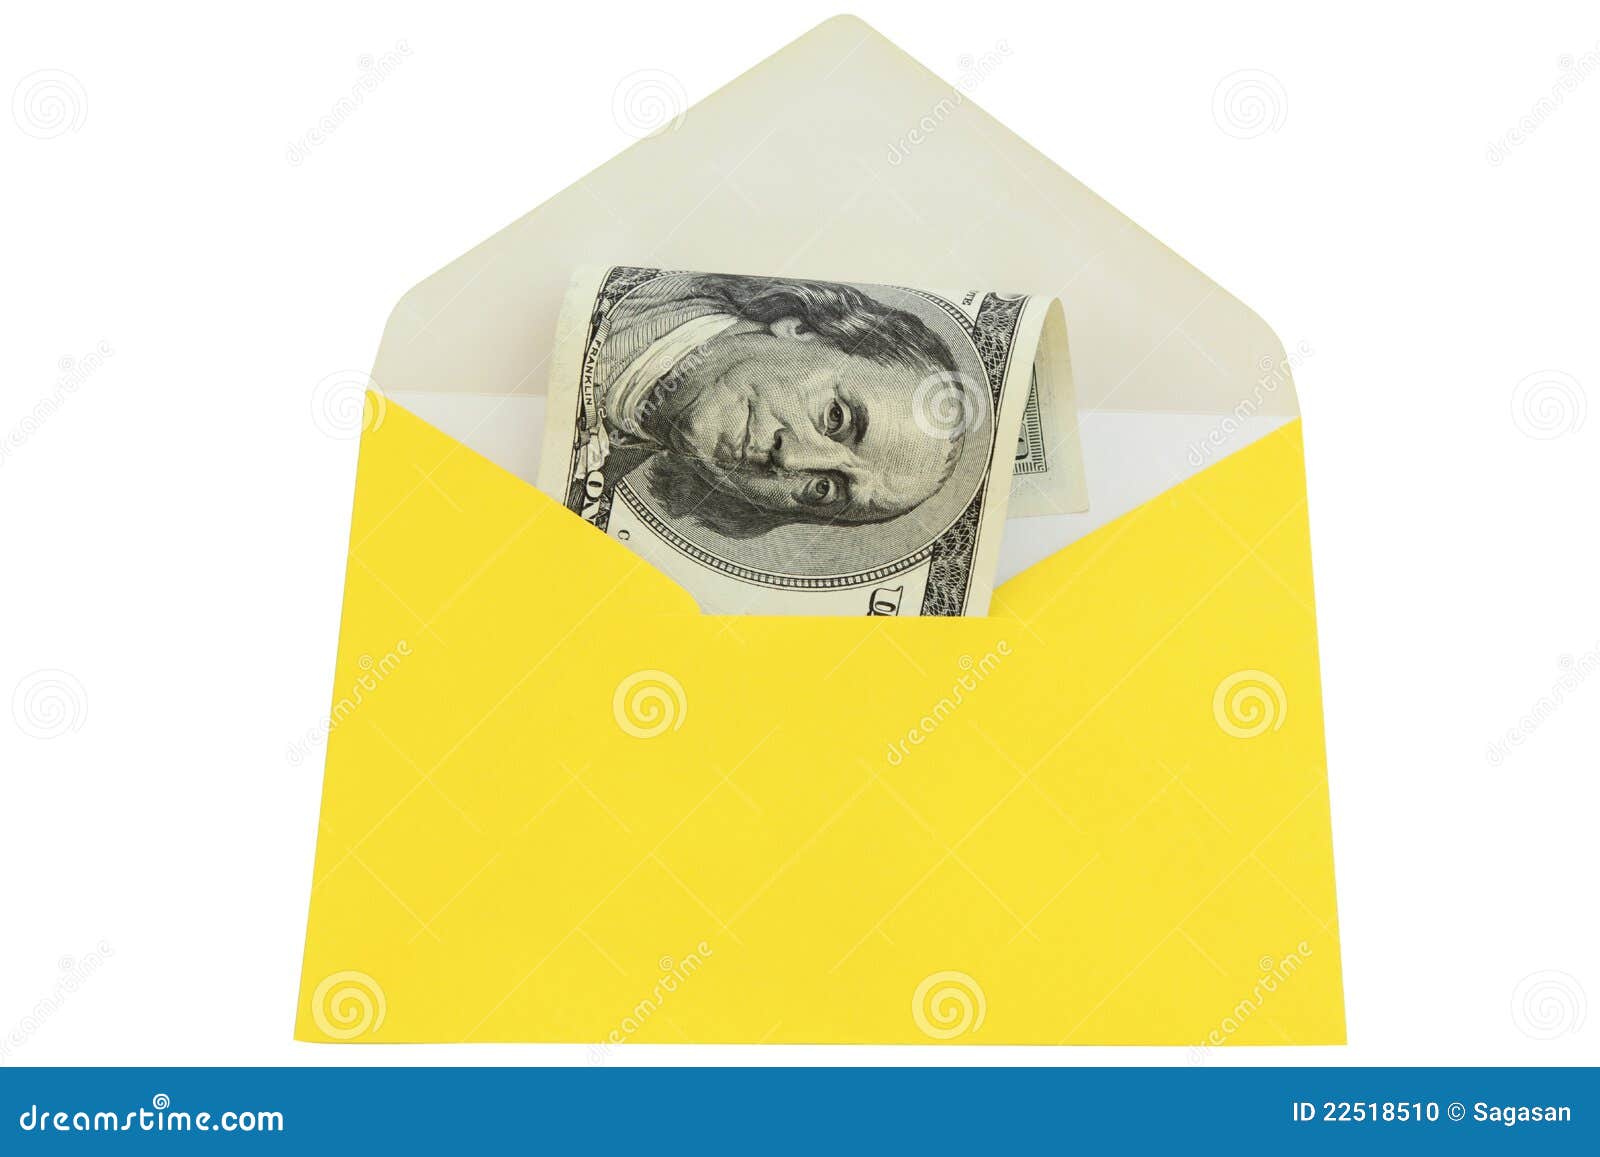 Yellow envelope stock photo. Image of income, finance - 22518510